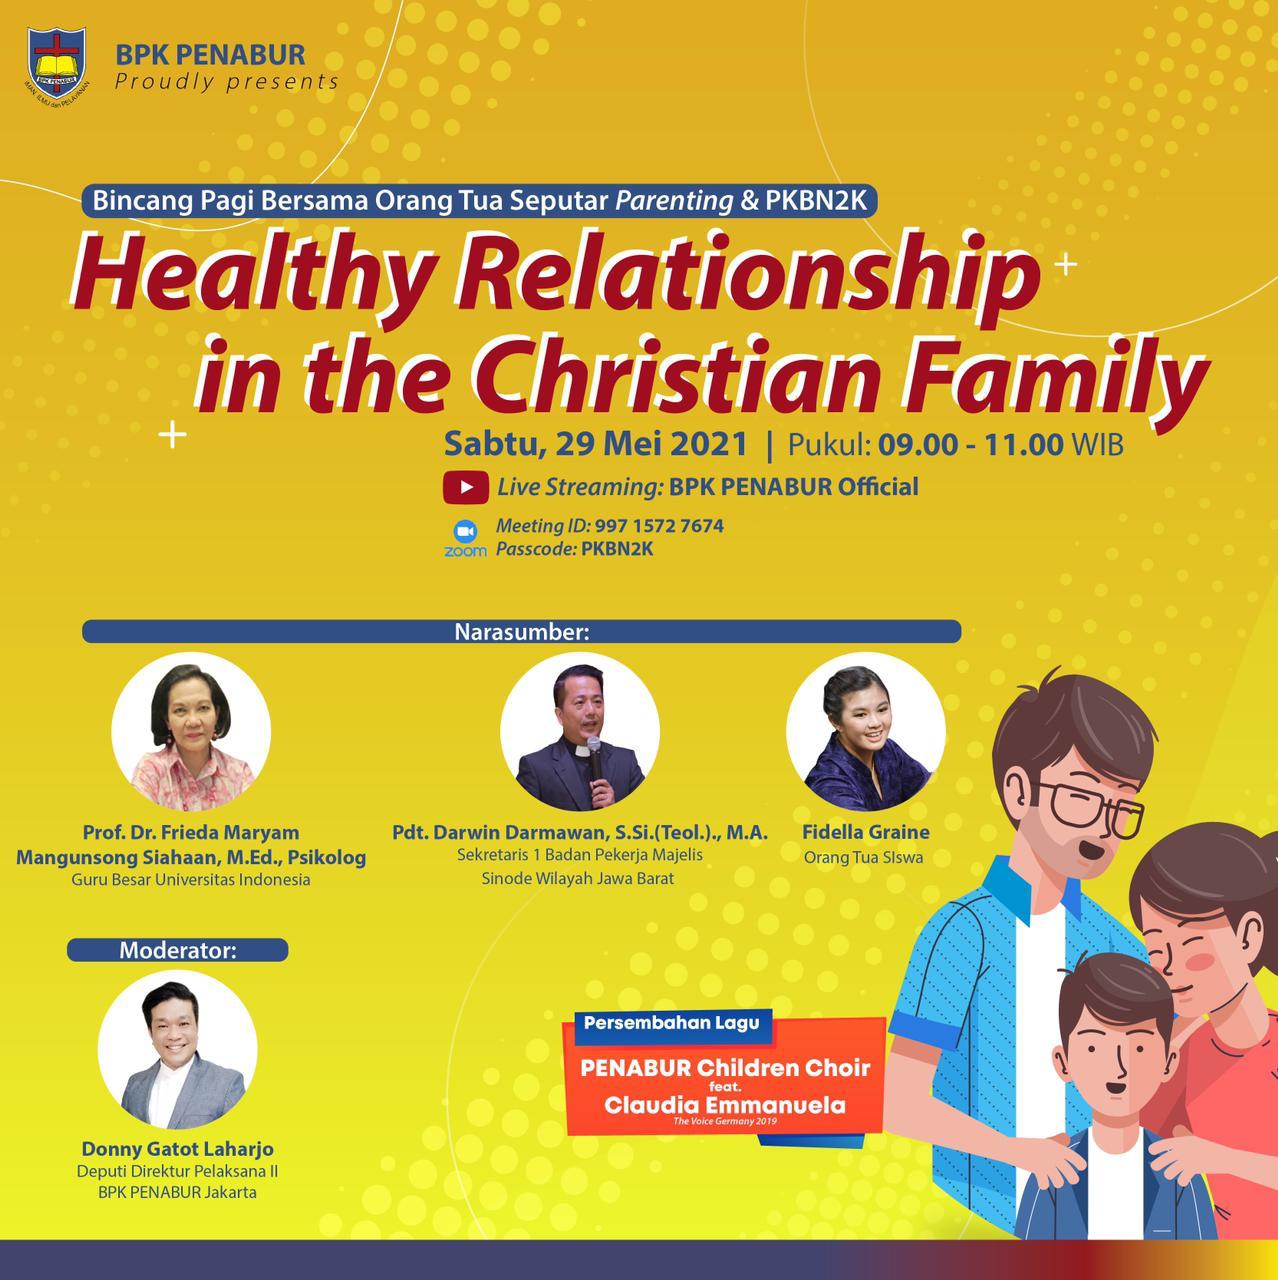 “Healthy Relationship In The Christian Family”